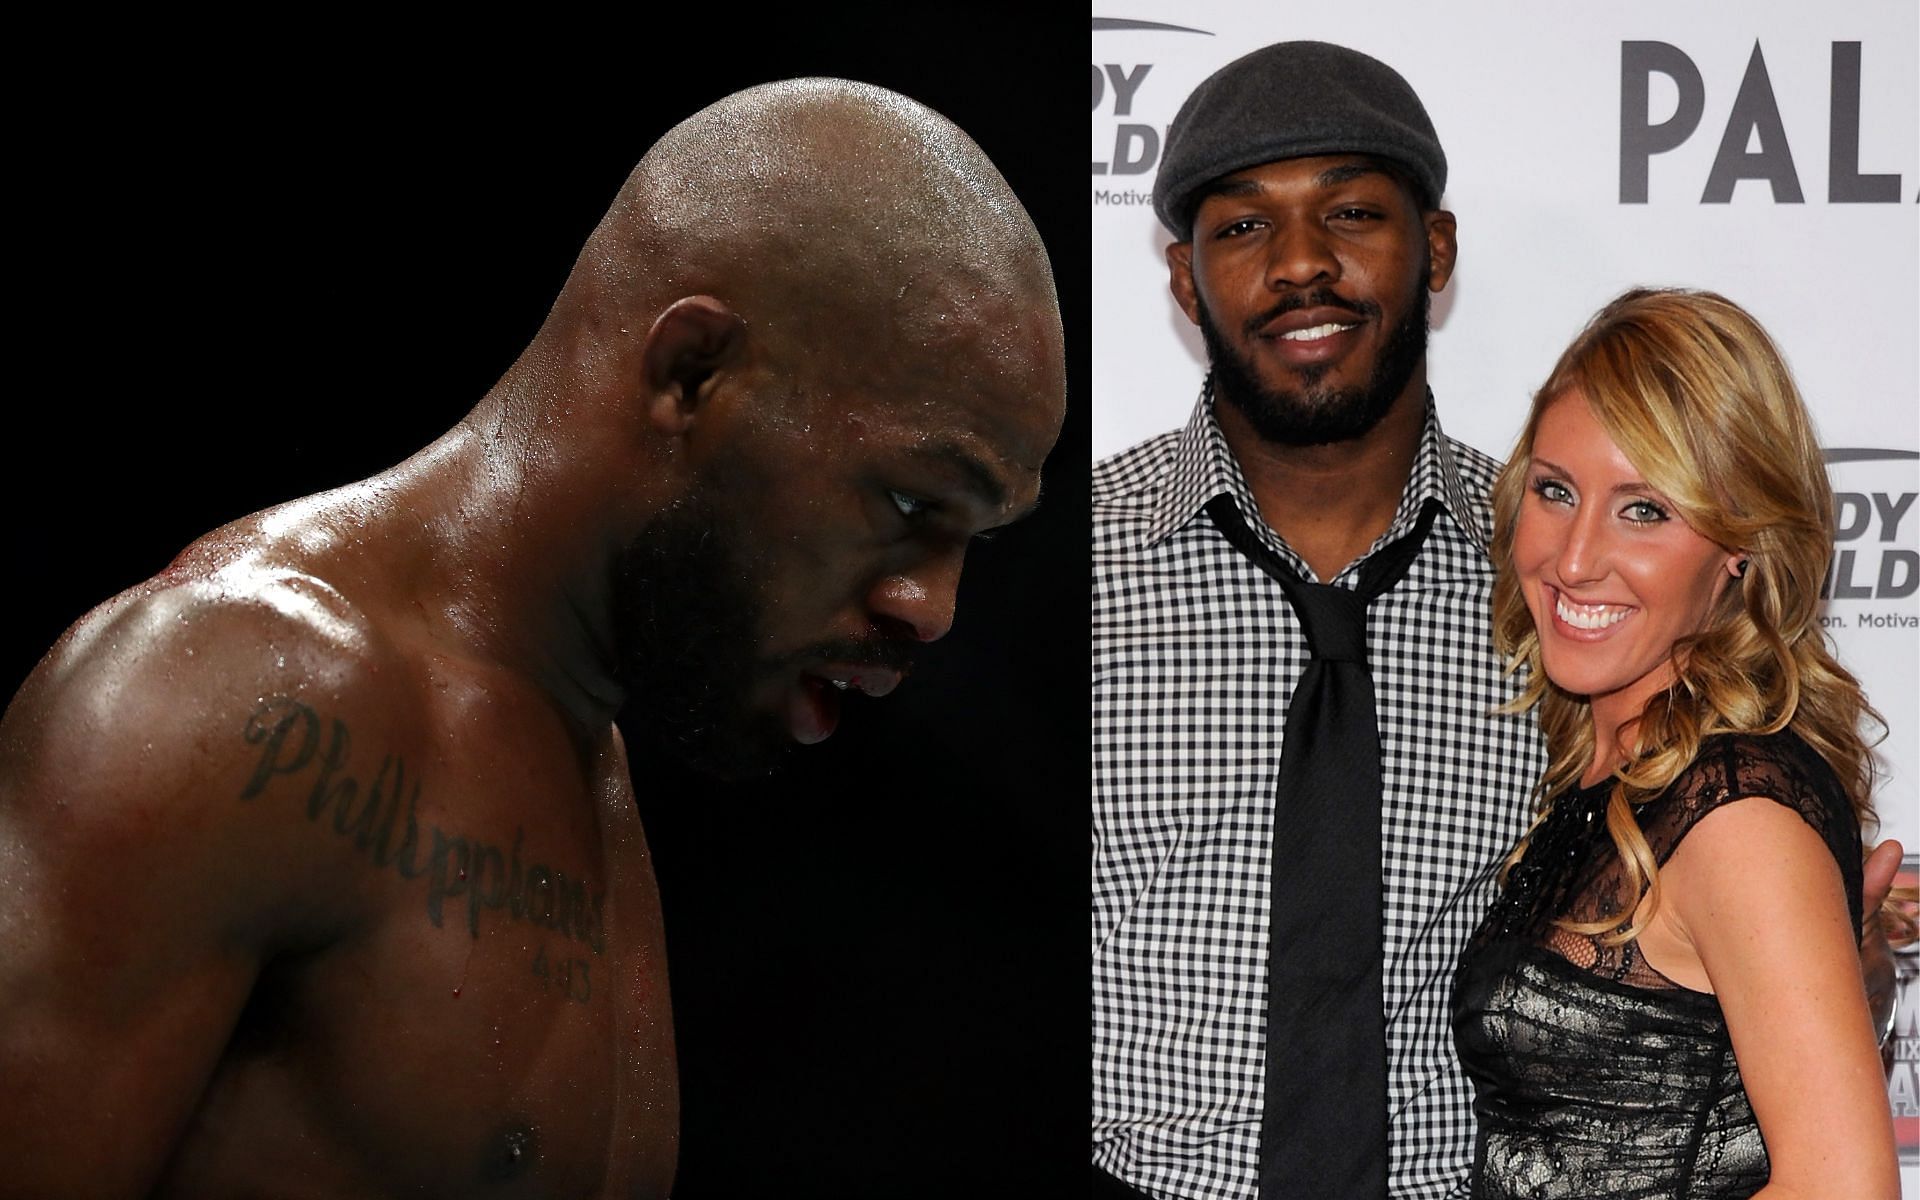 Jon Jones (left) with his ex, Jessie Moses (right). [Images courtesy: both images from Getty Images]